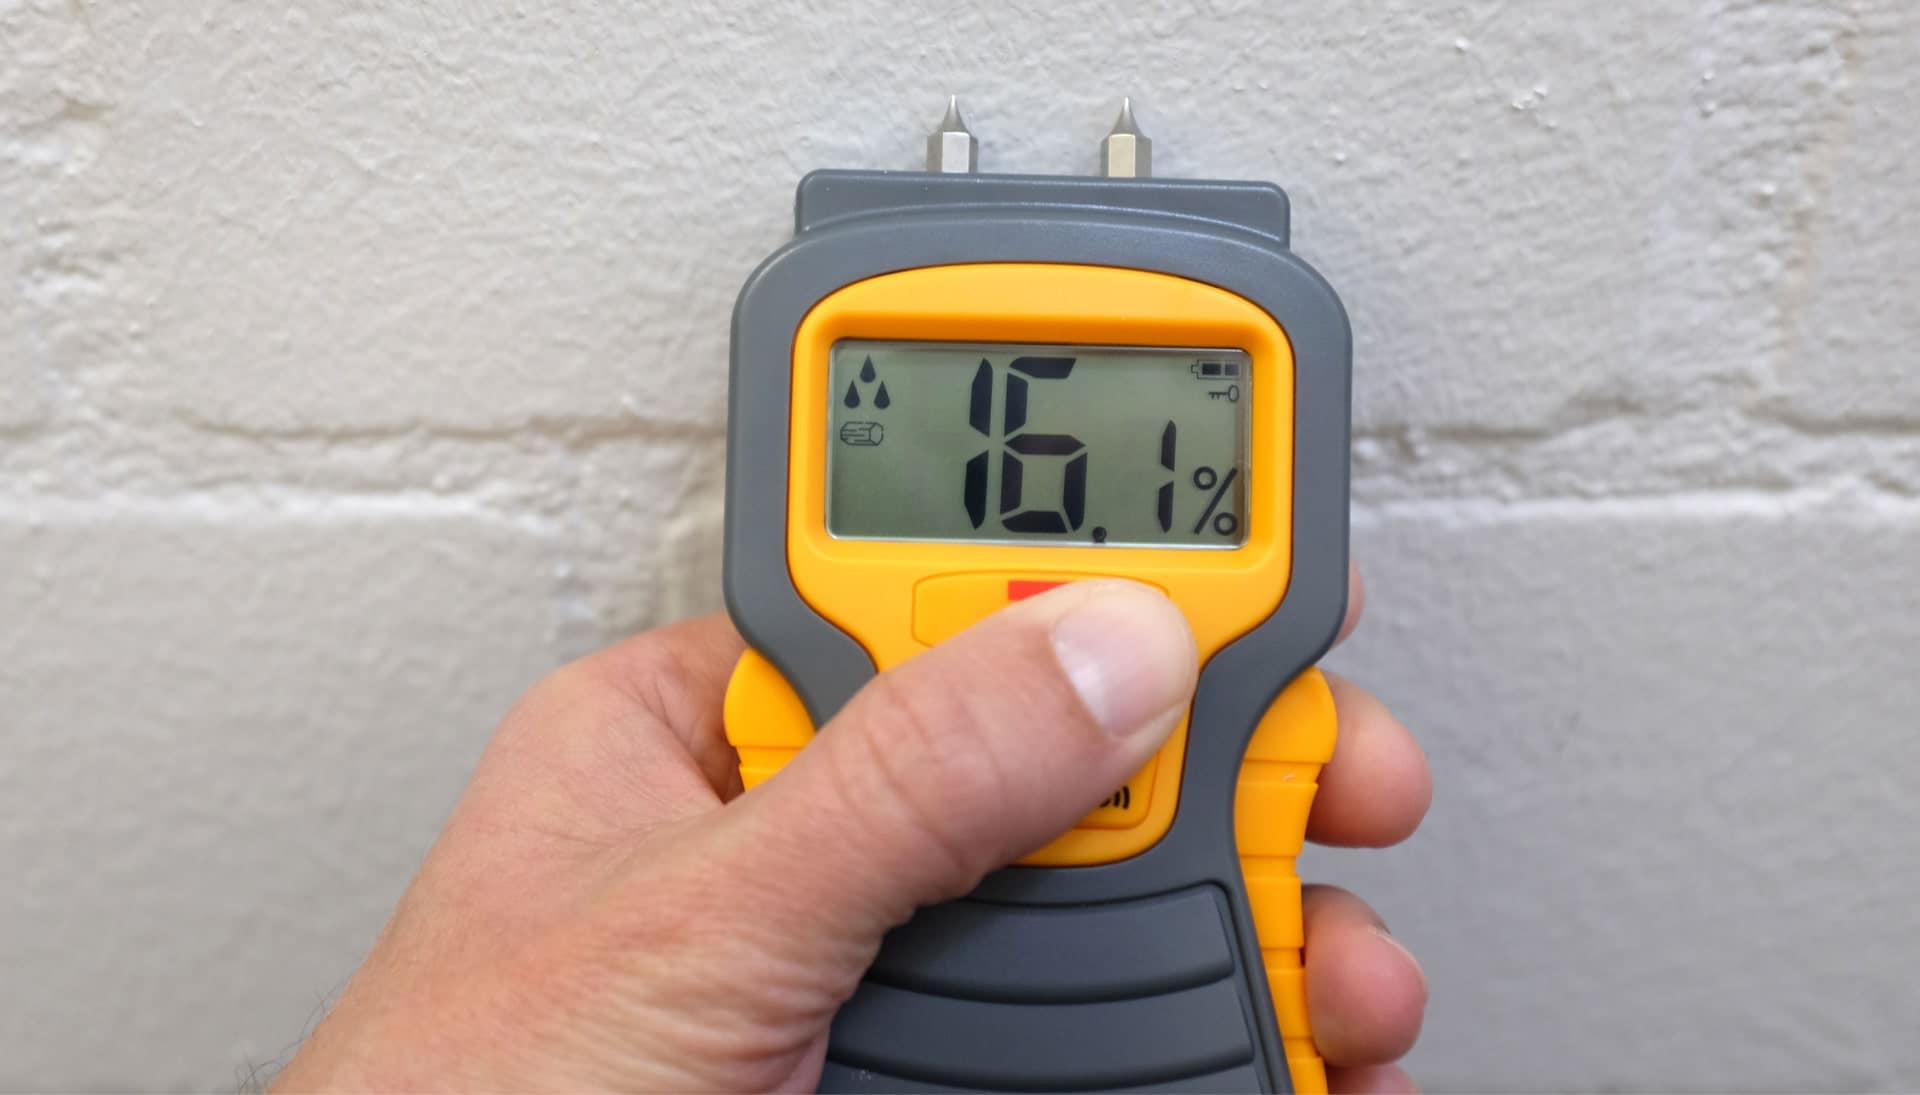 We provide fast, accurate, and affordable mold testing services in Champaign, Illinois.